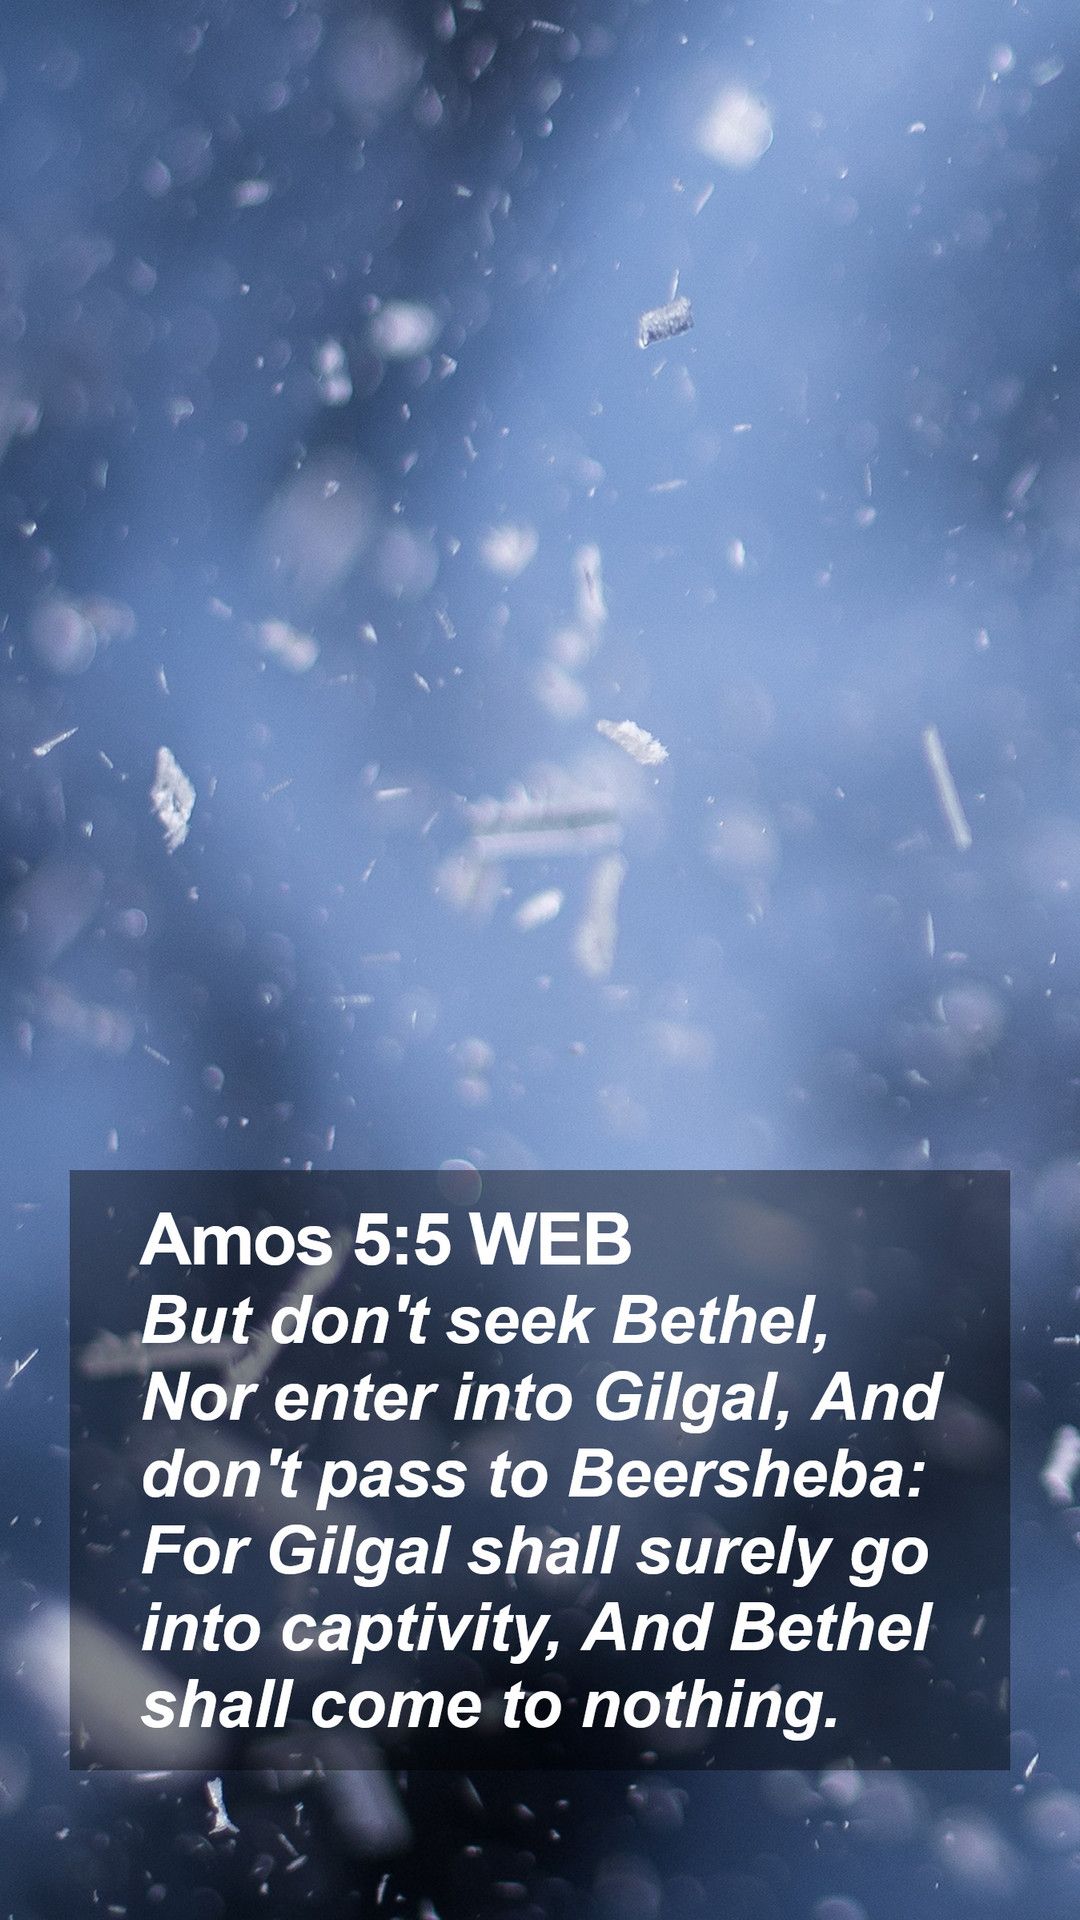 Amos 5:5 WEB Mobile Phone Wallpaper don't seek Bethel, Nor enter into Gilgal, And